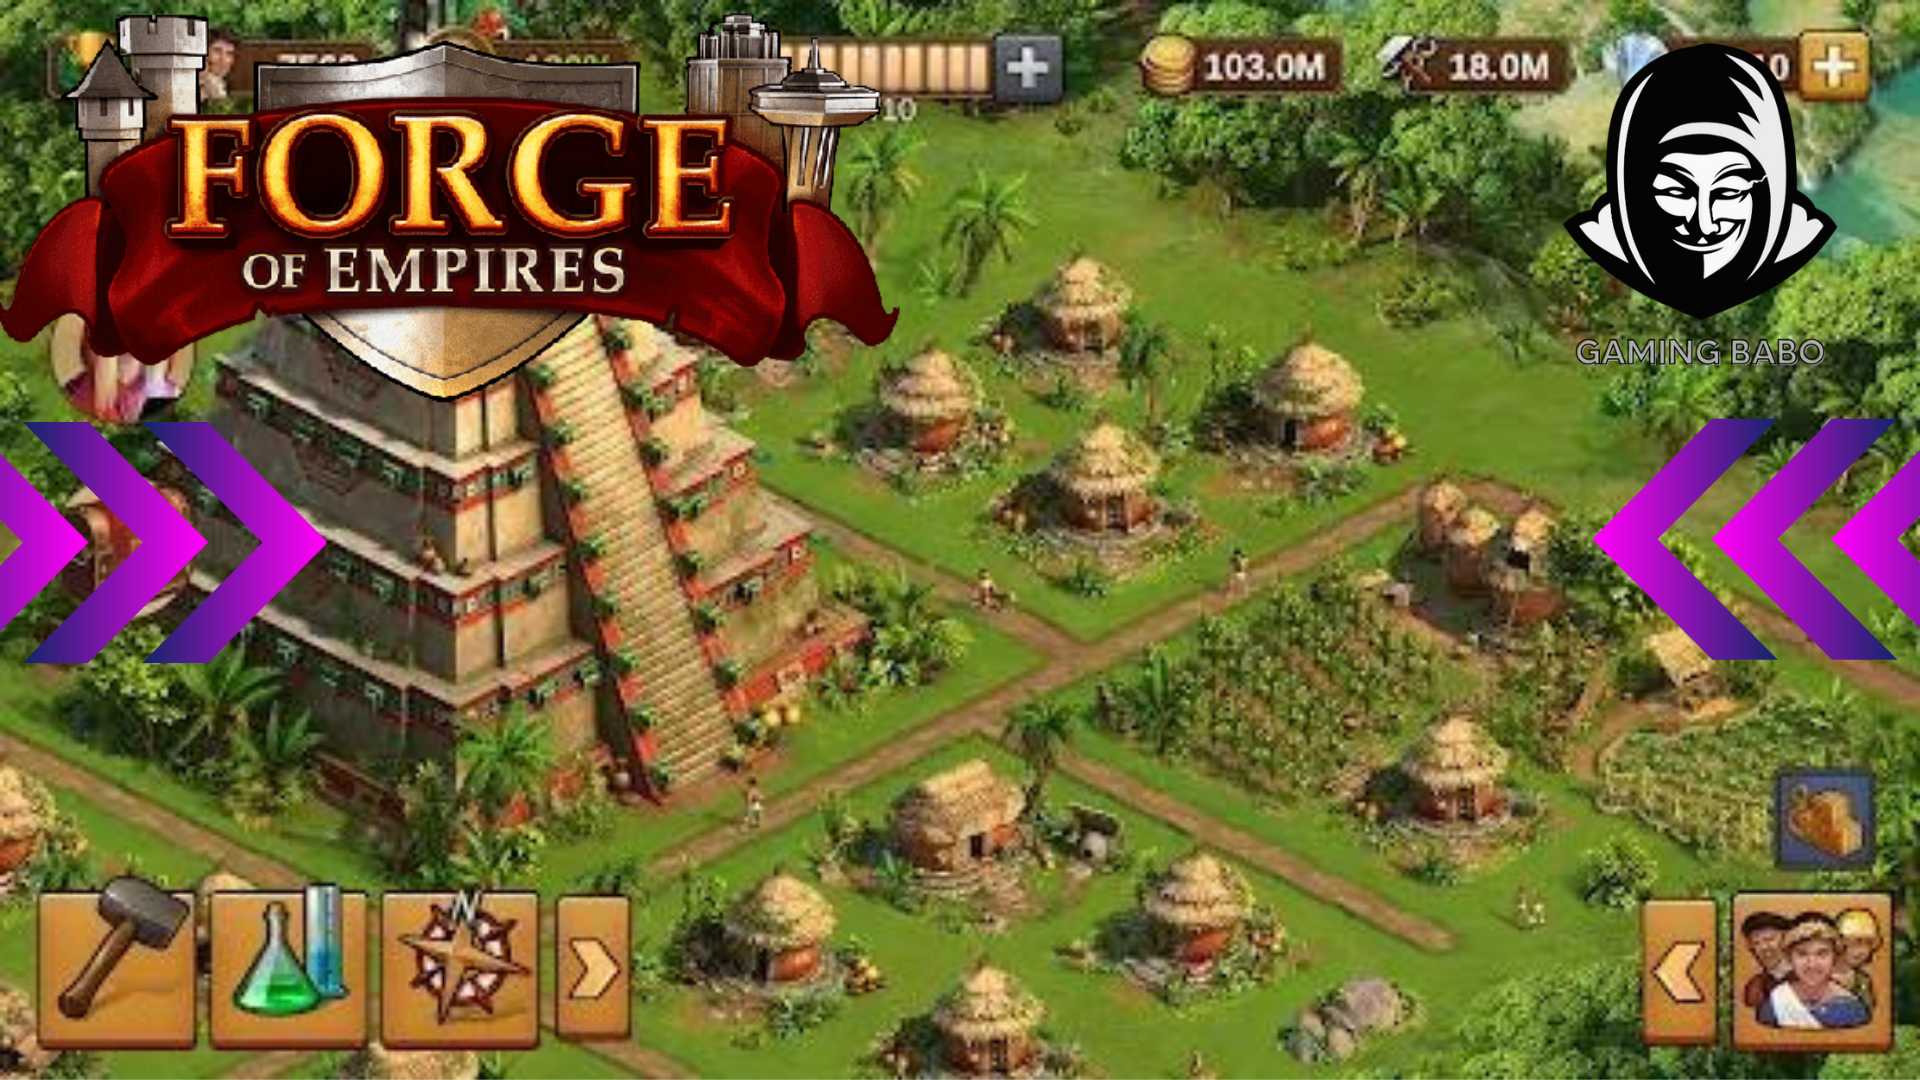 Forge of Empires tips and tricks